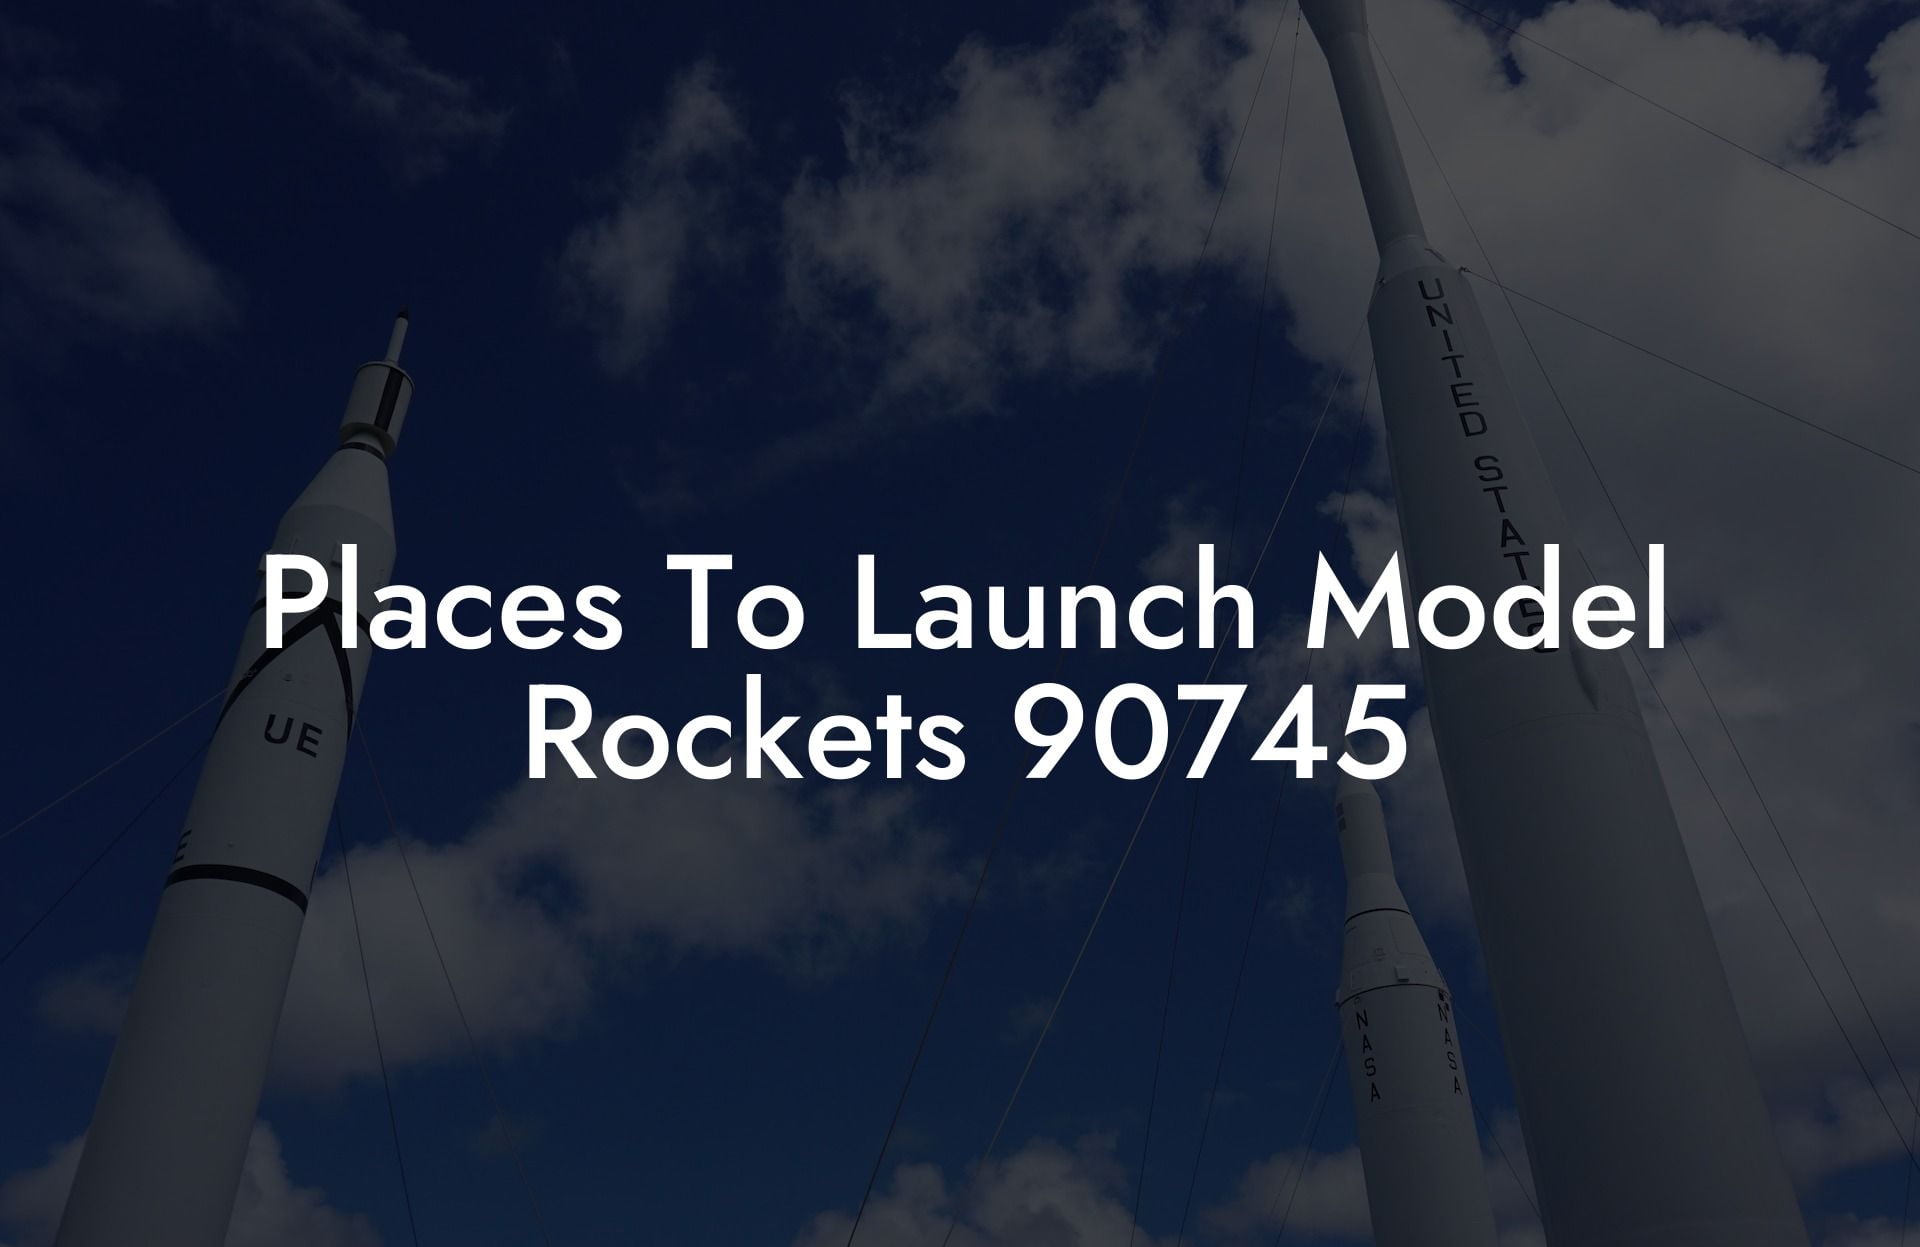 Places To Launch Model Rockets 90745